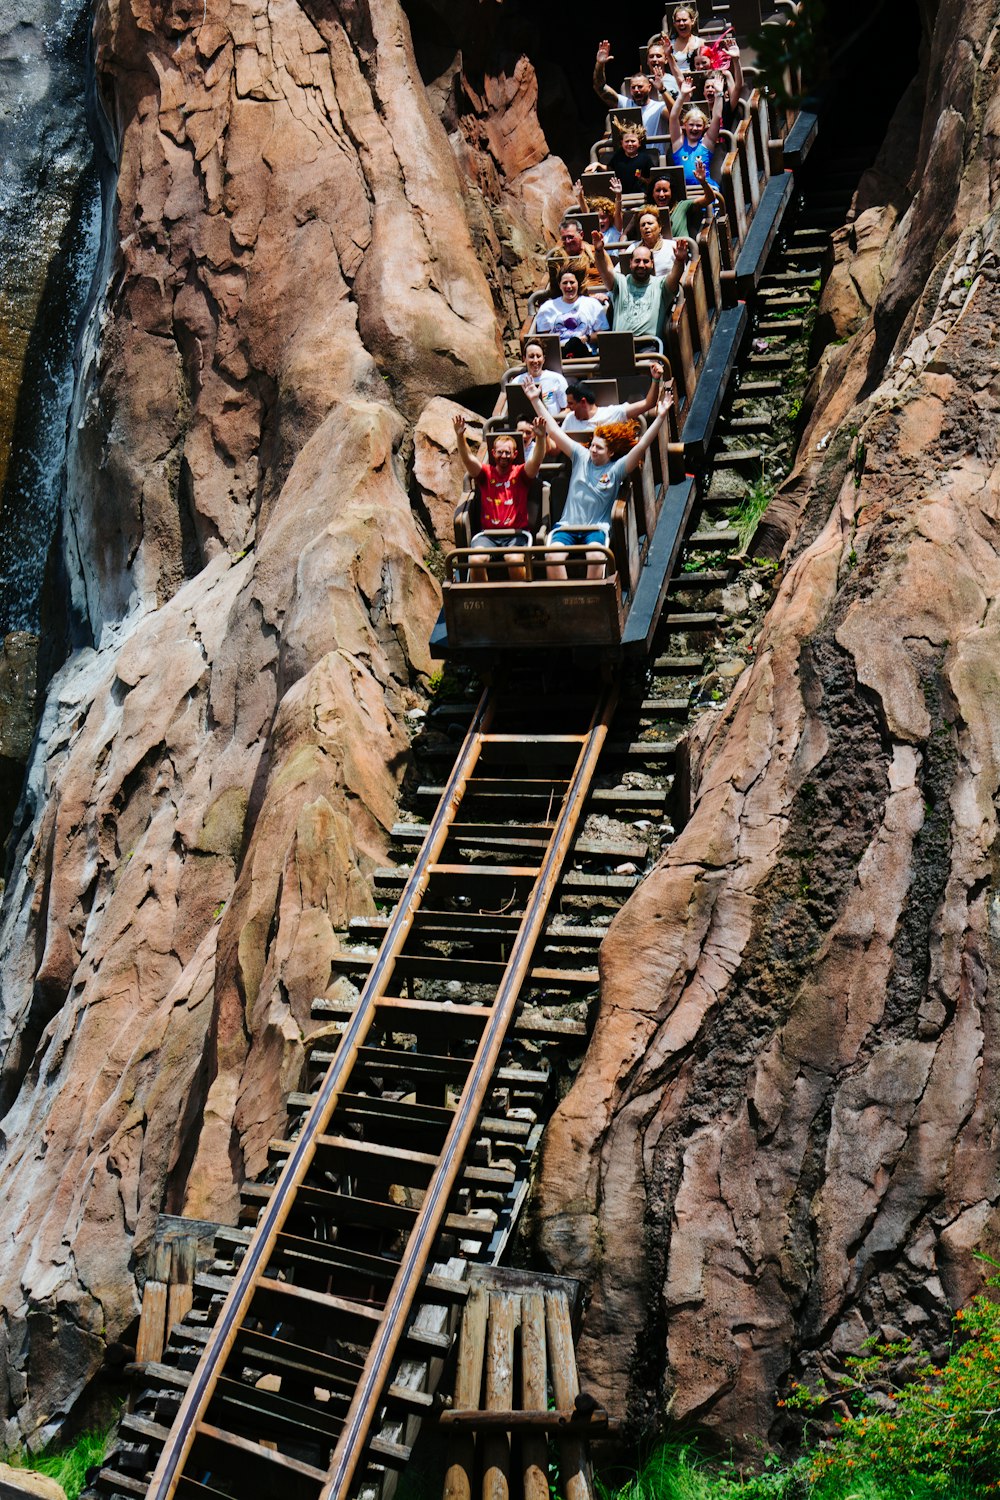 a group of people riding a roller coaster down a mountain